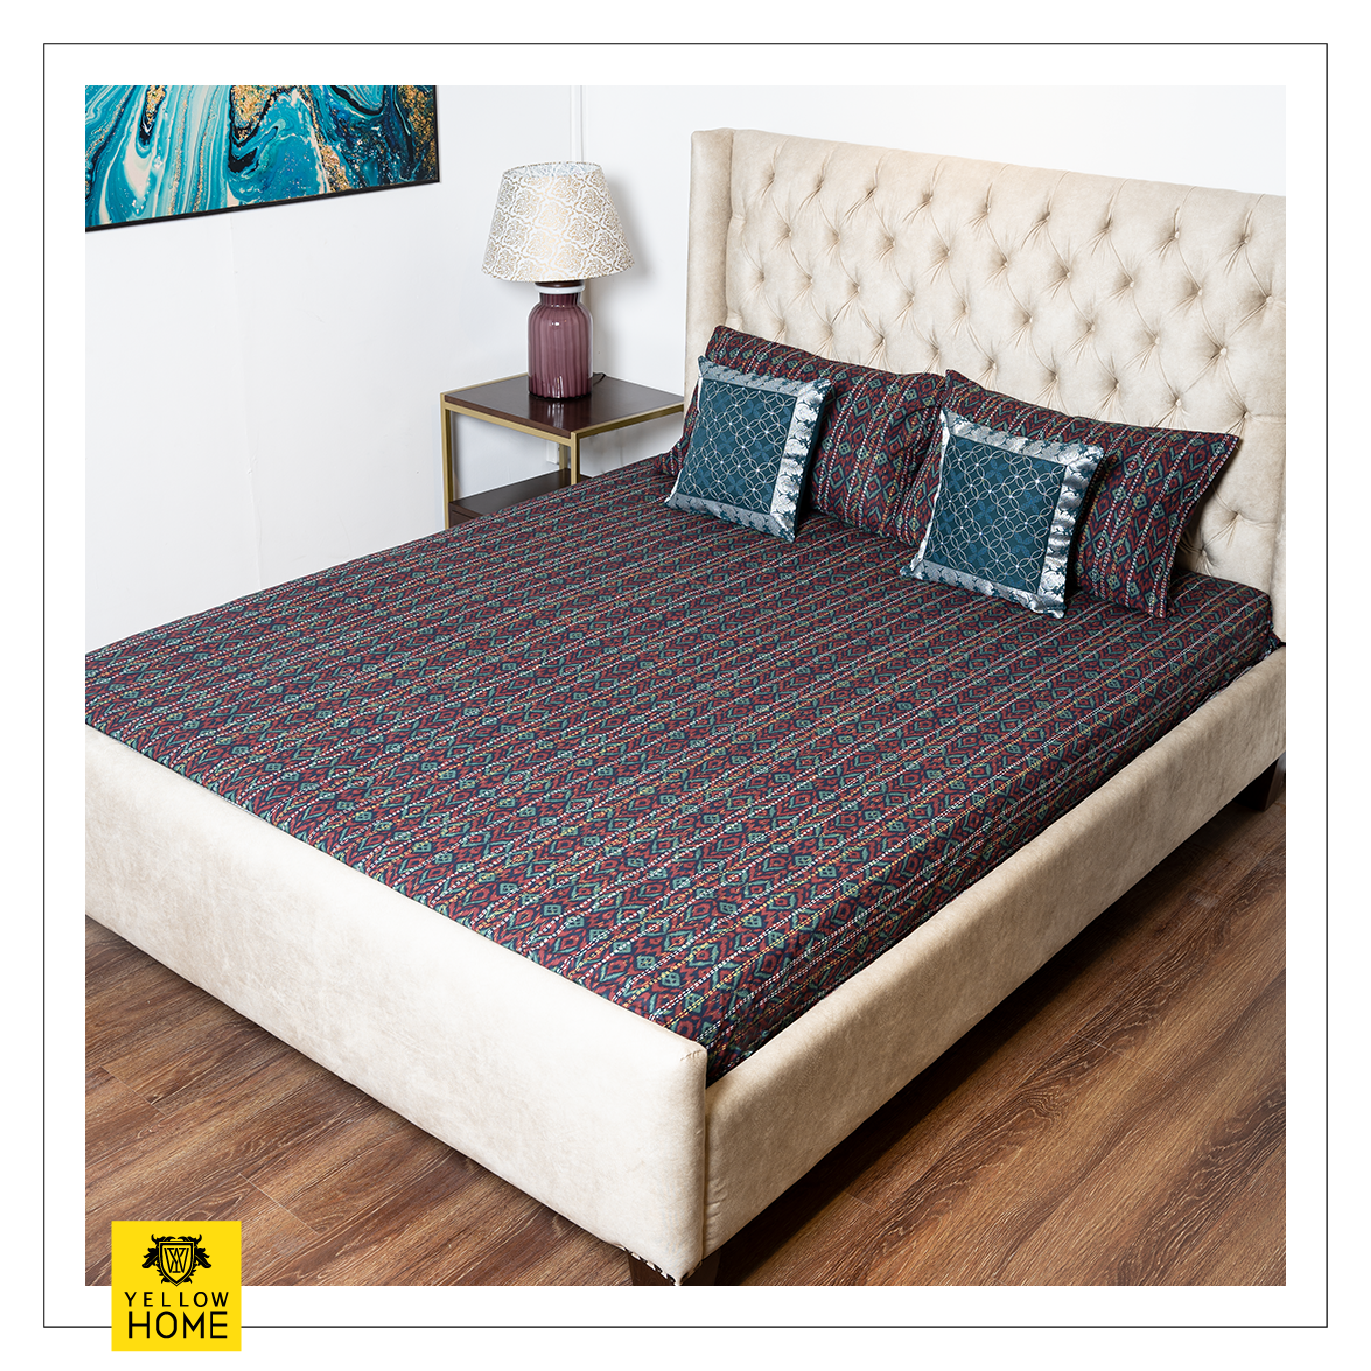 Bed Sheet - Ethnic Blage  (Queen Size)